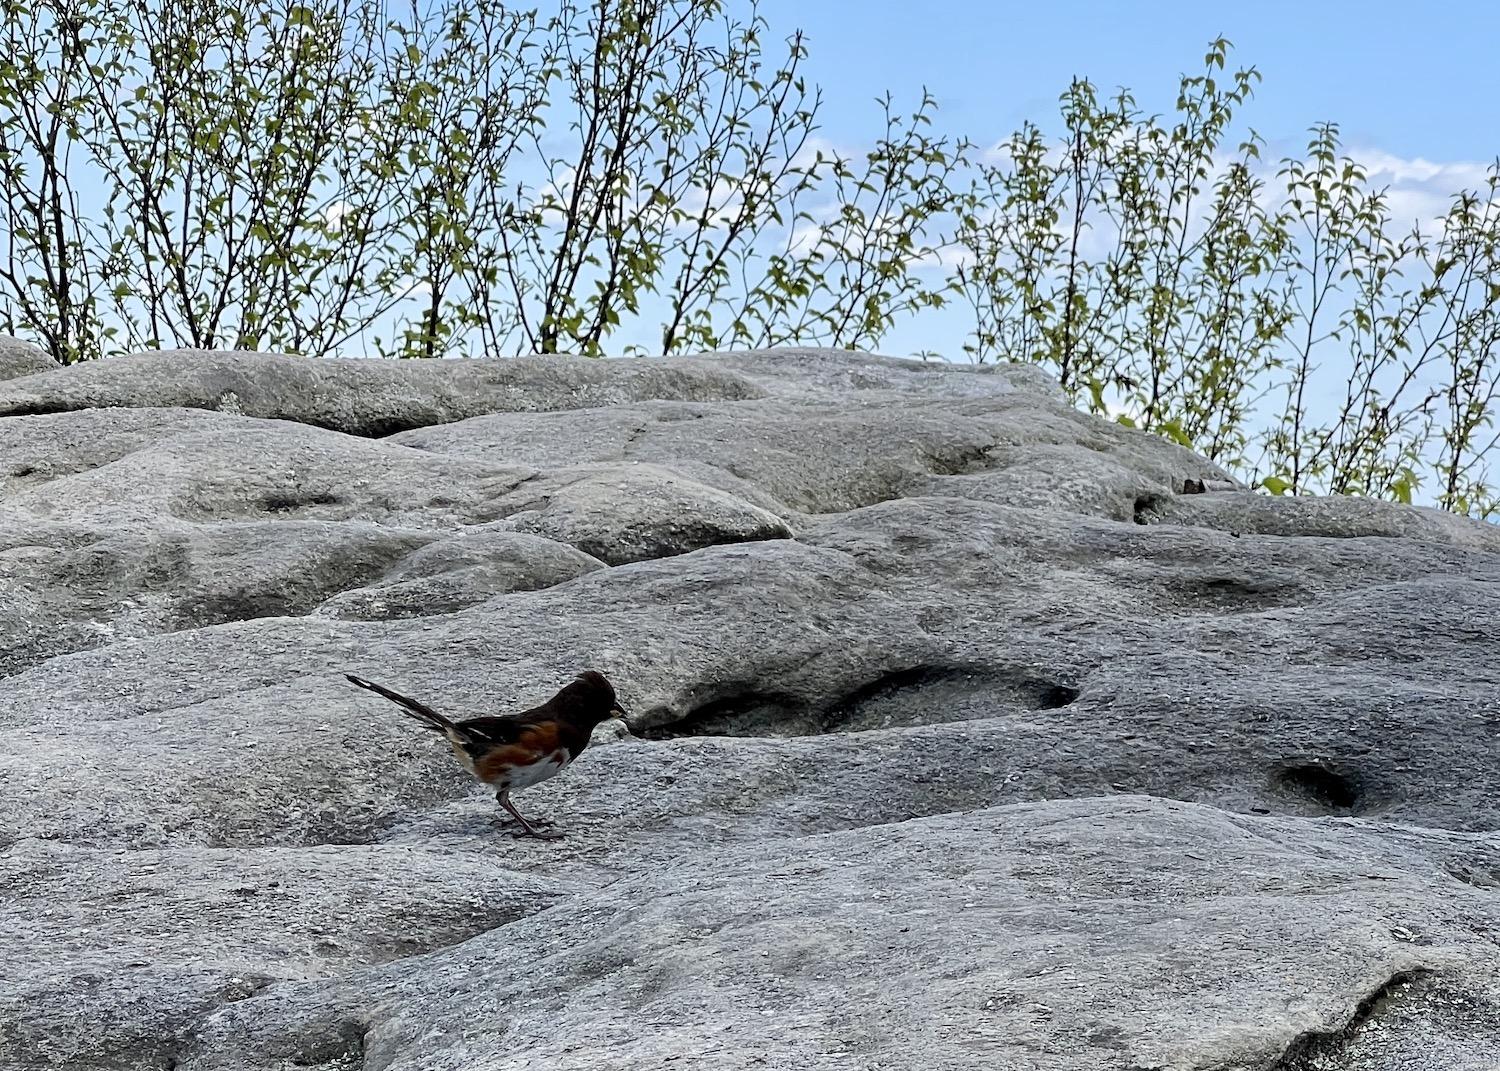 I only had a cellphone camera when this Eastern Towhee hopped by.